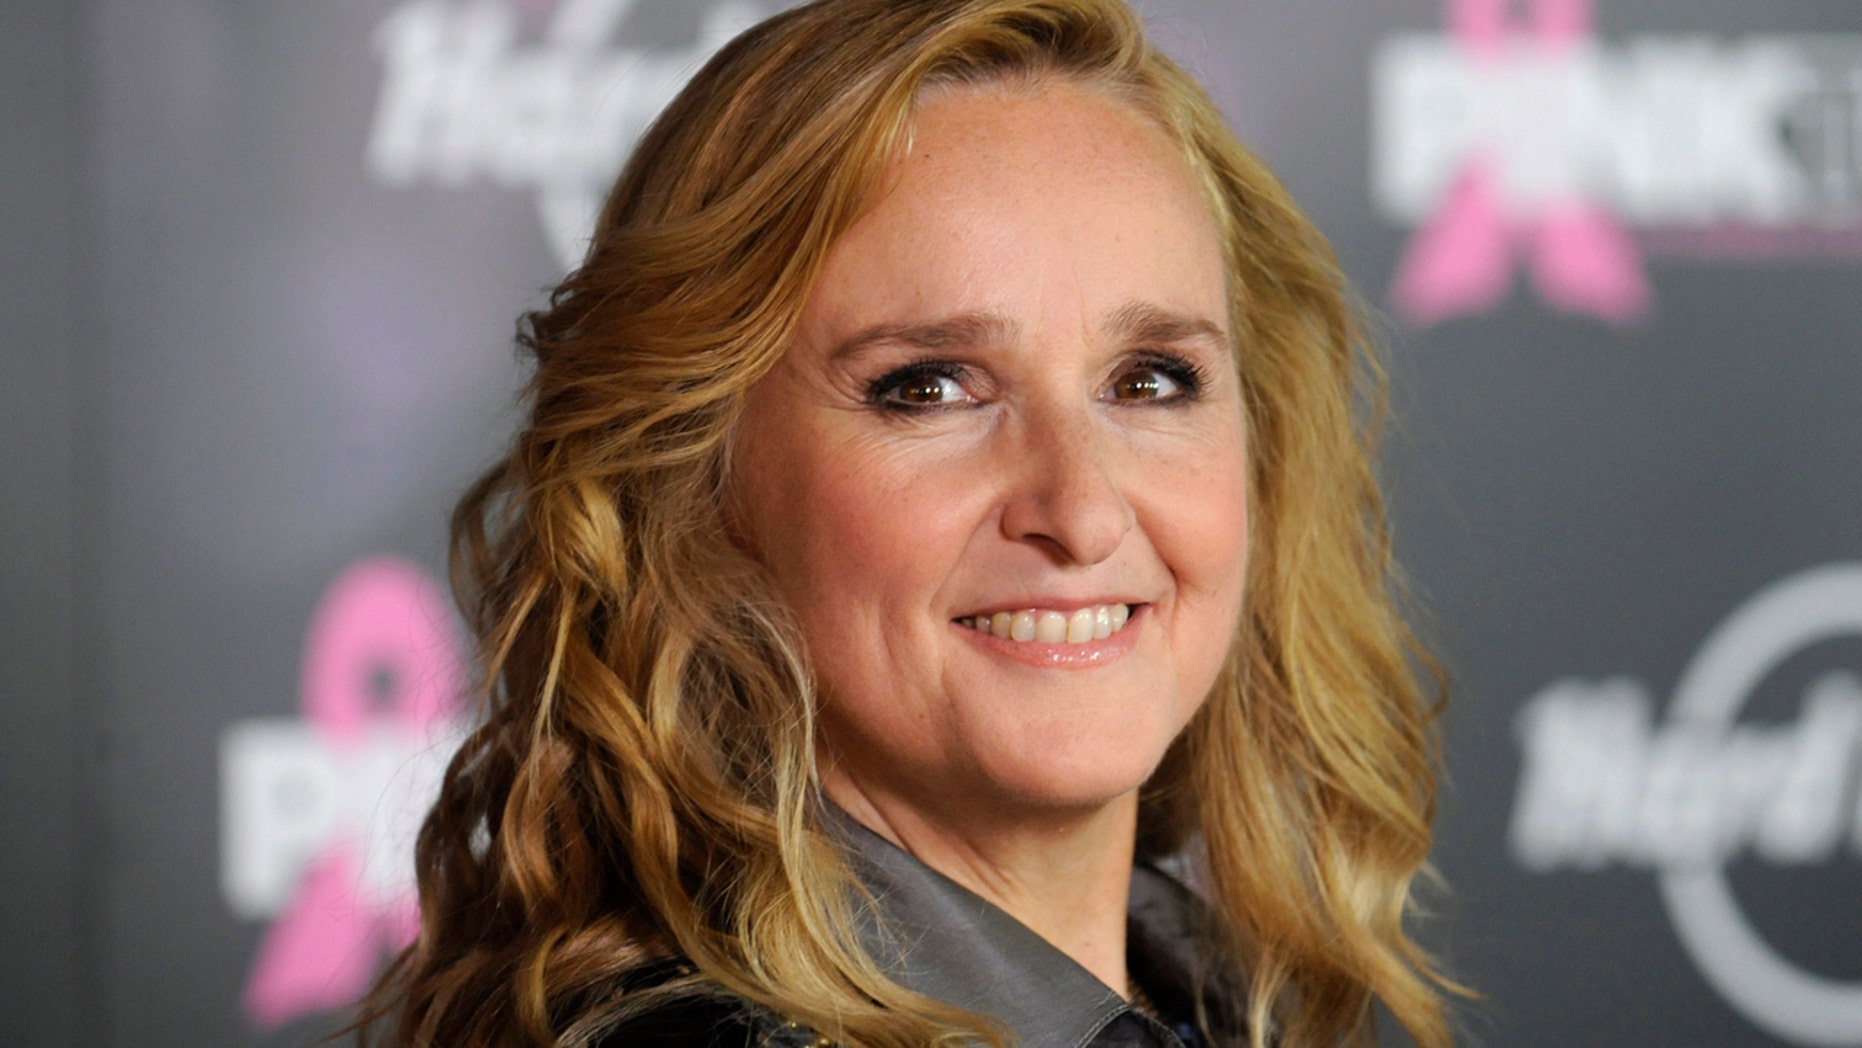 Melissa Etheridge smokes pot with her kids 'It brings you much closer